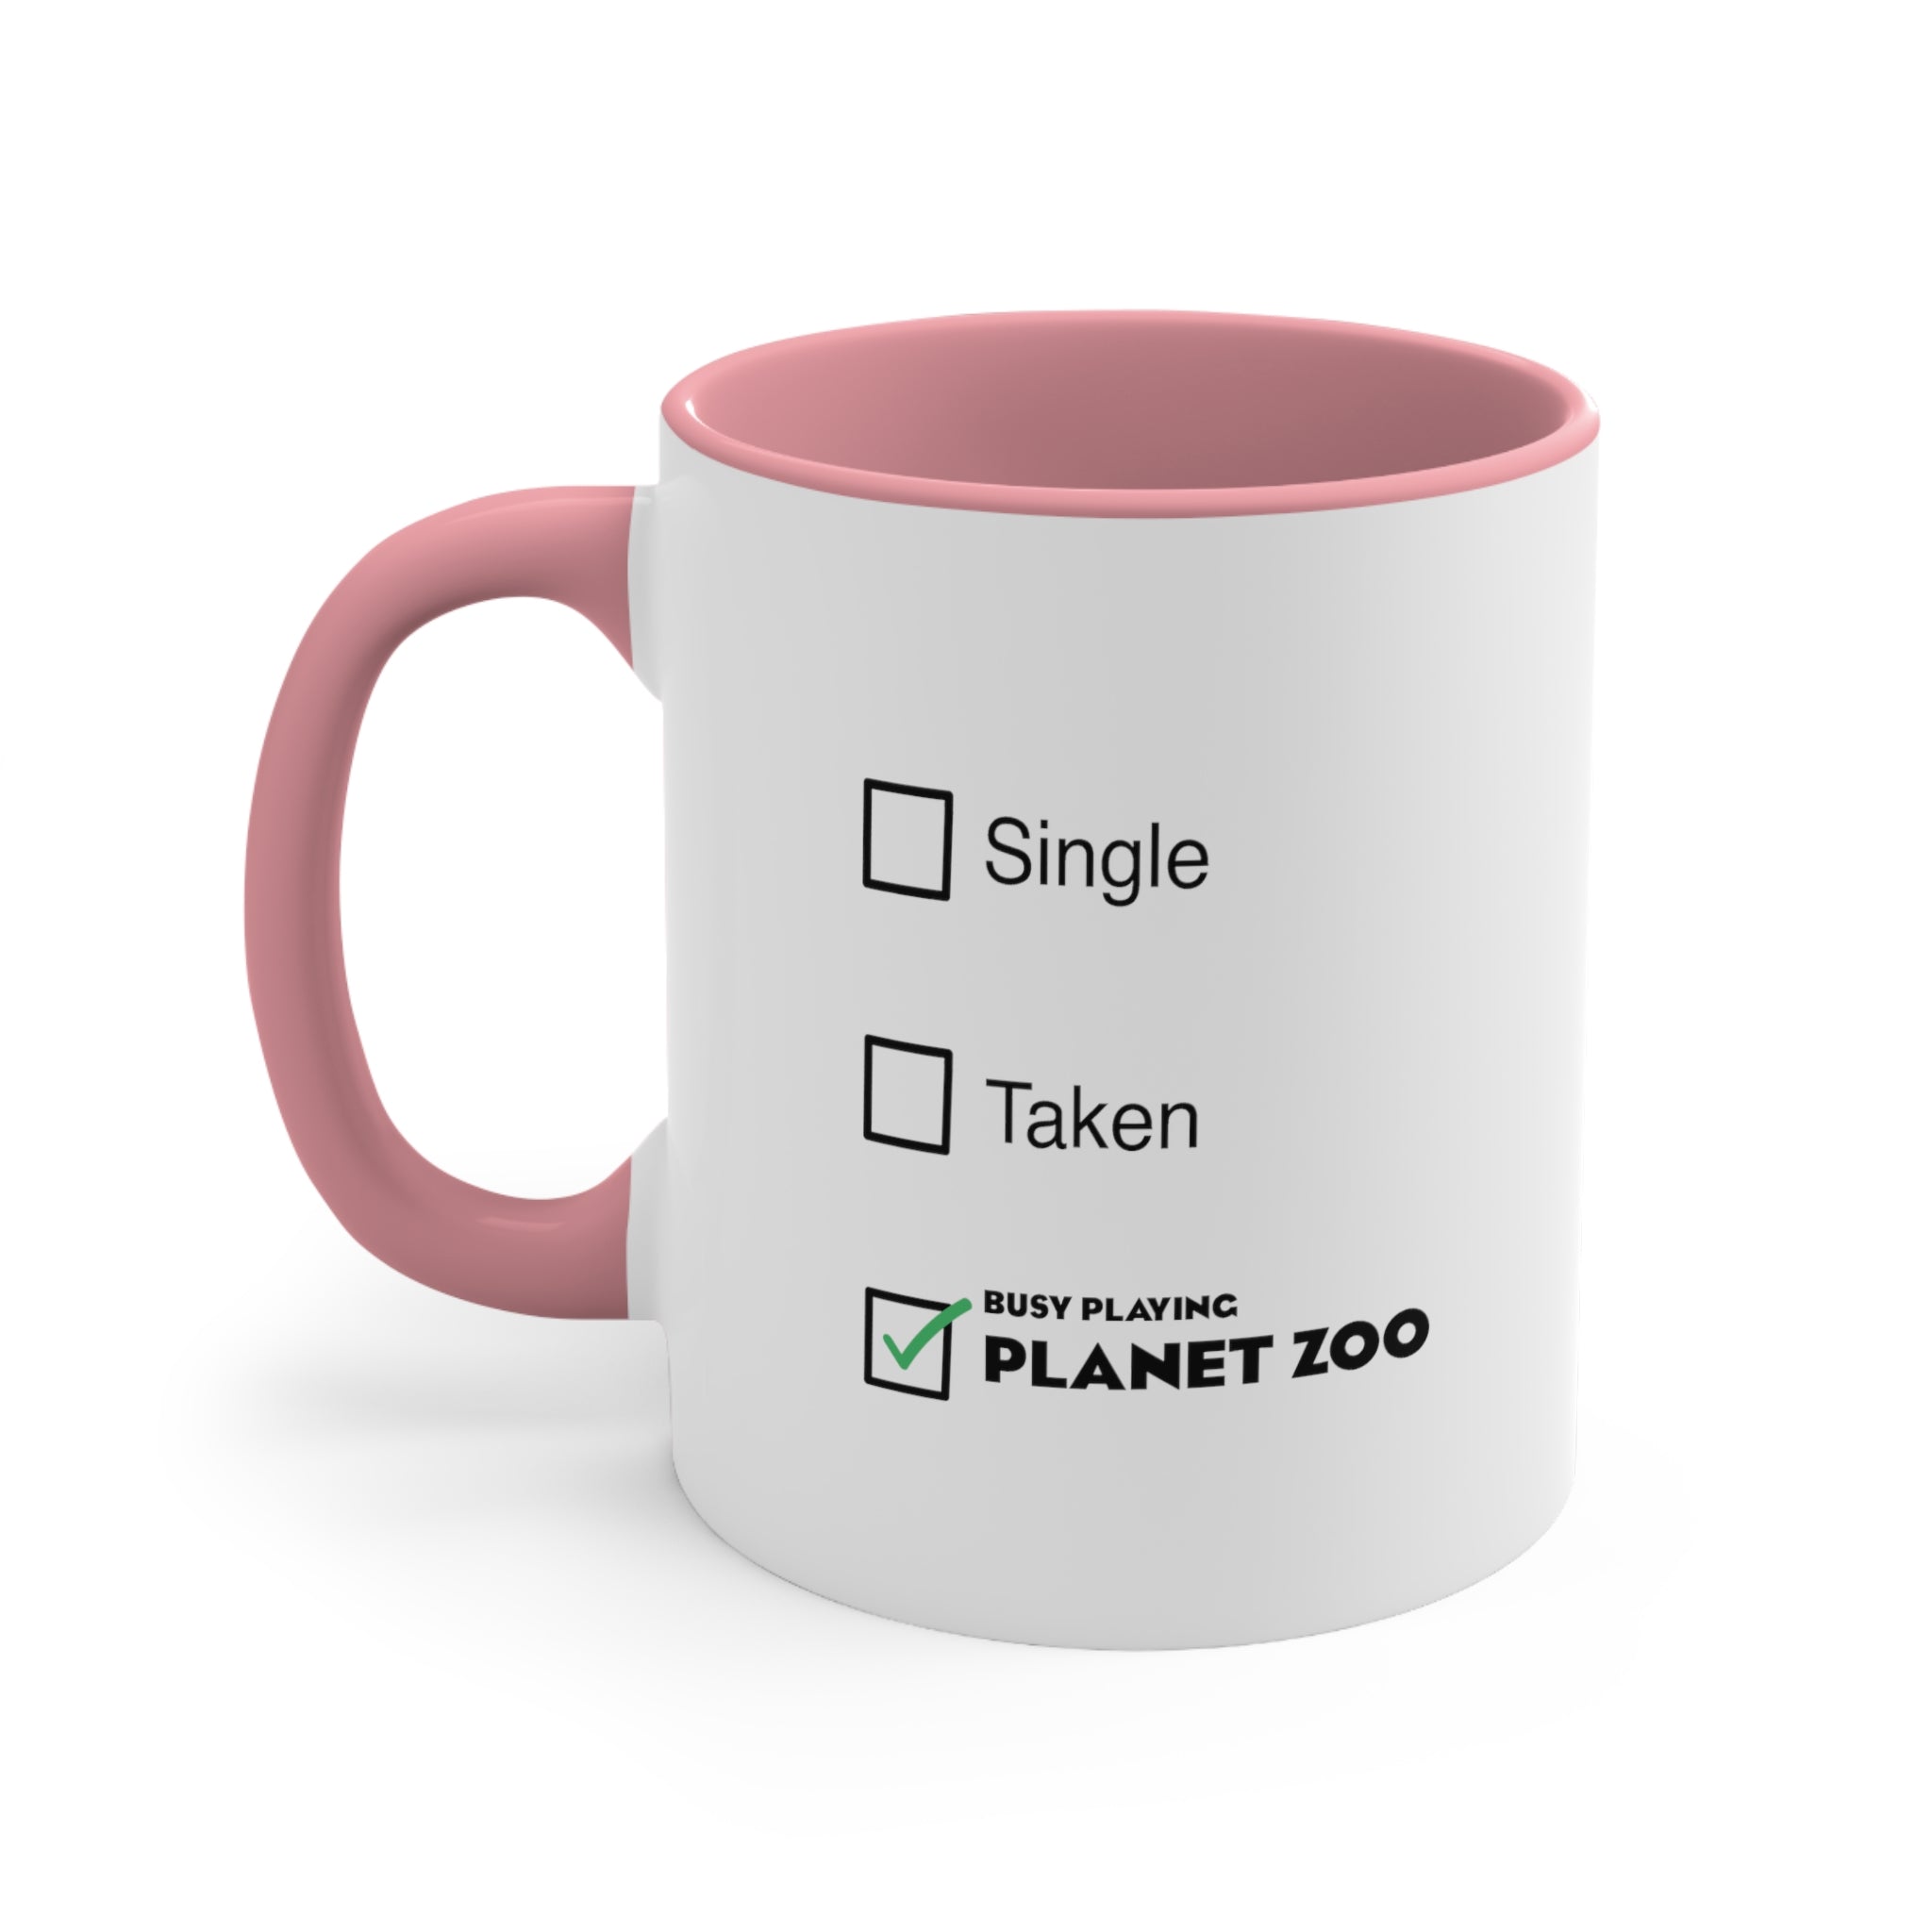 Planet Zoo Funny coffee Mug, 11oz Single Taken Busy Playing Cups Mugs Cup Gamer Gift For Him Her Game Cup Cups Mugs Birthday Christmas Valentine's Anniversary Gifts